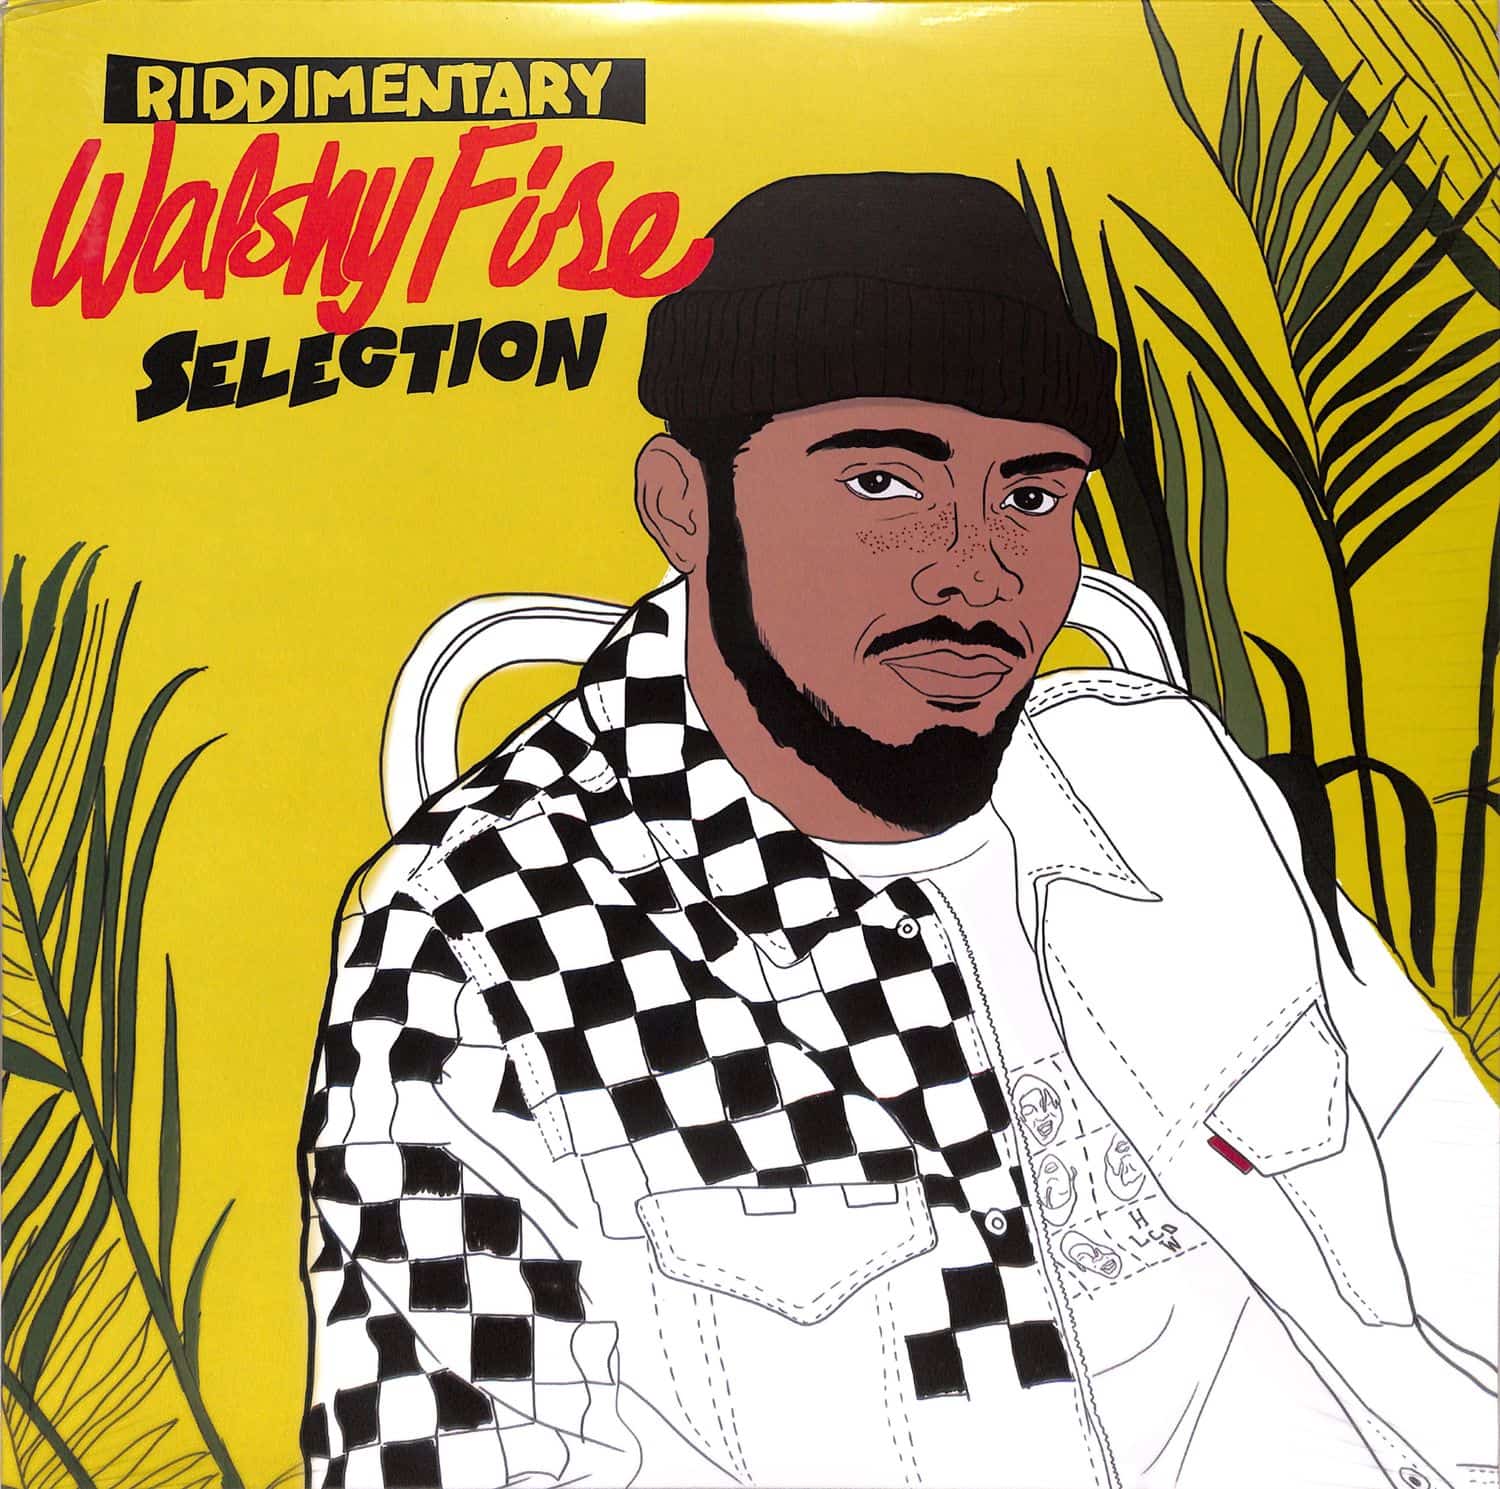 Walshy Fire Presents - RIDDIMENTARY SELECTION 